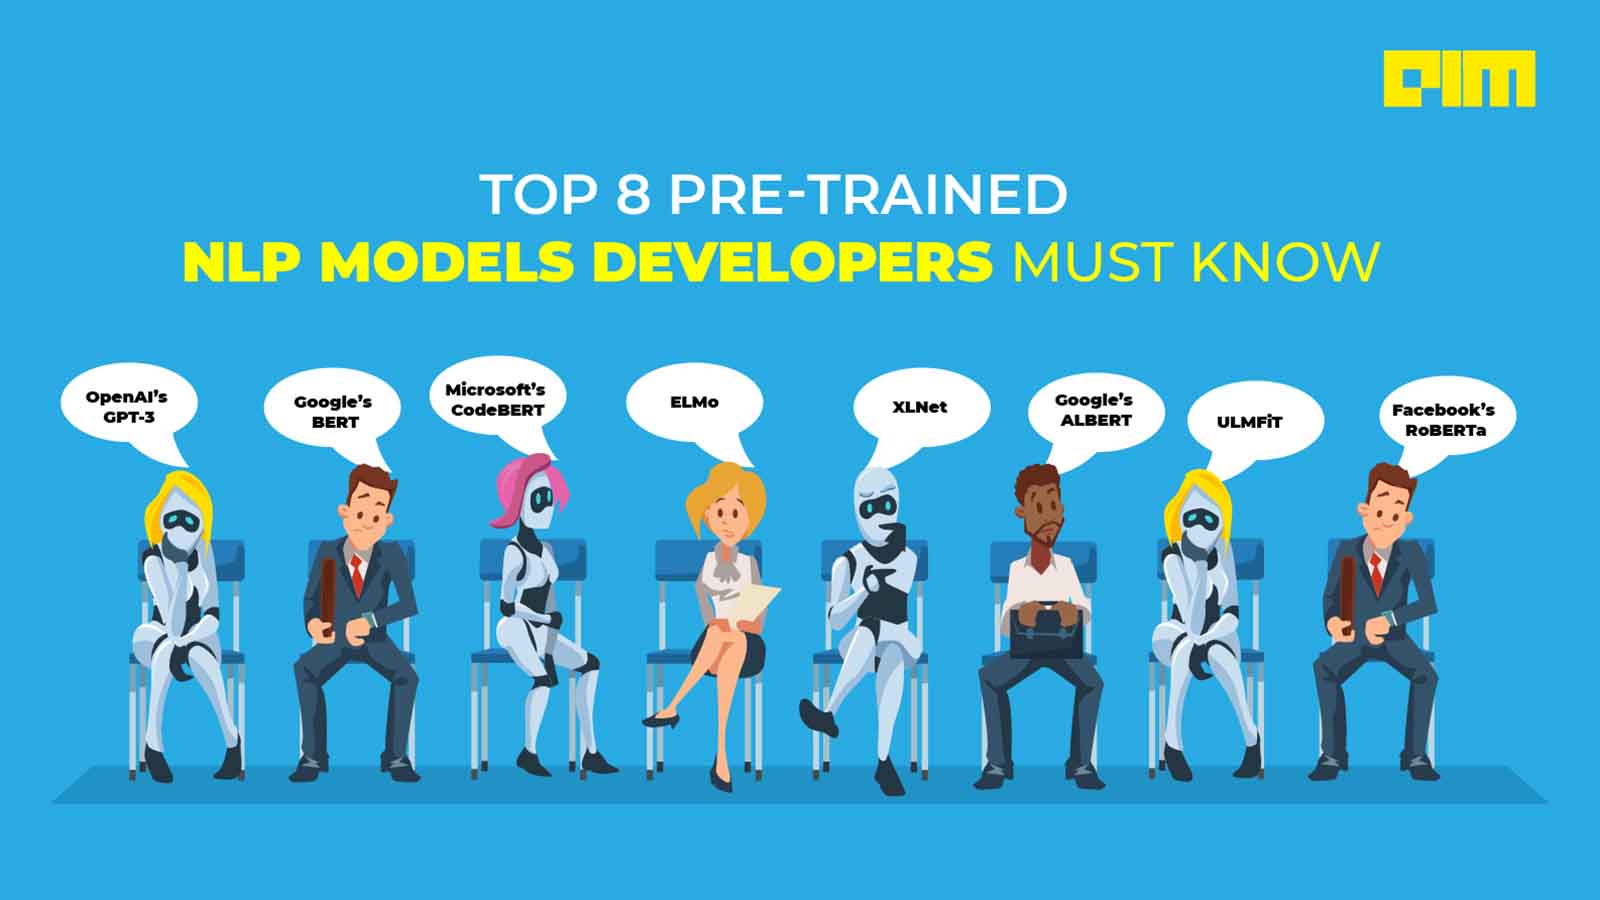 Top 8 Pre-Trained NLP Models Developers Must Know